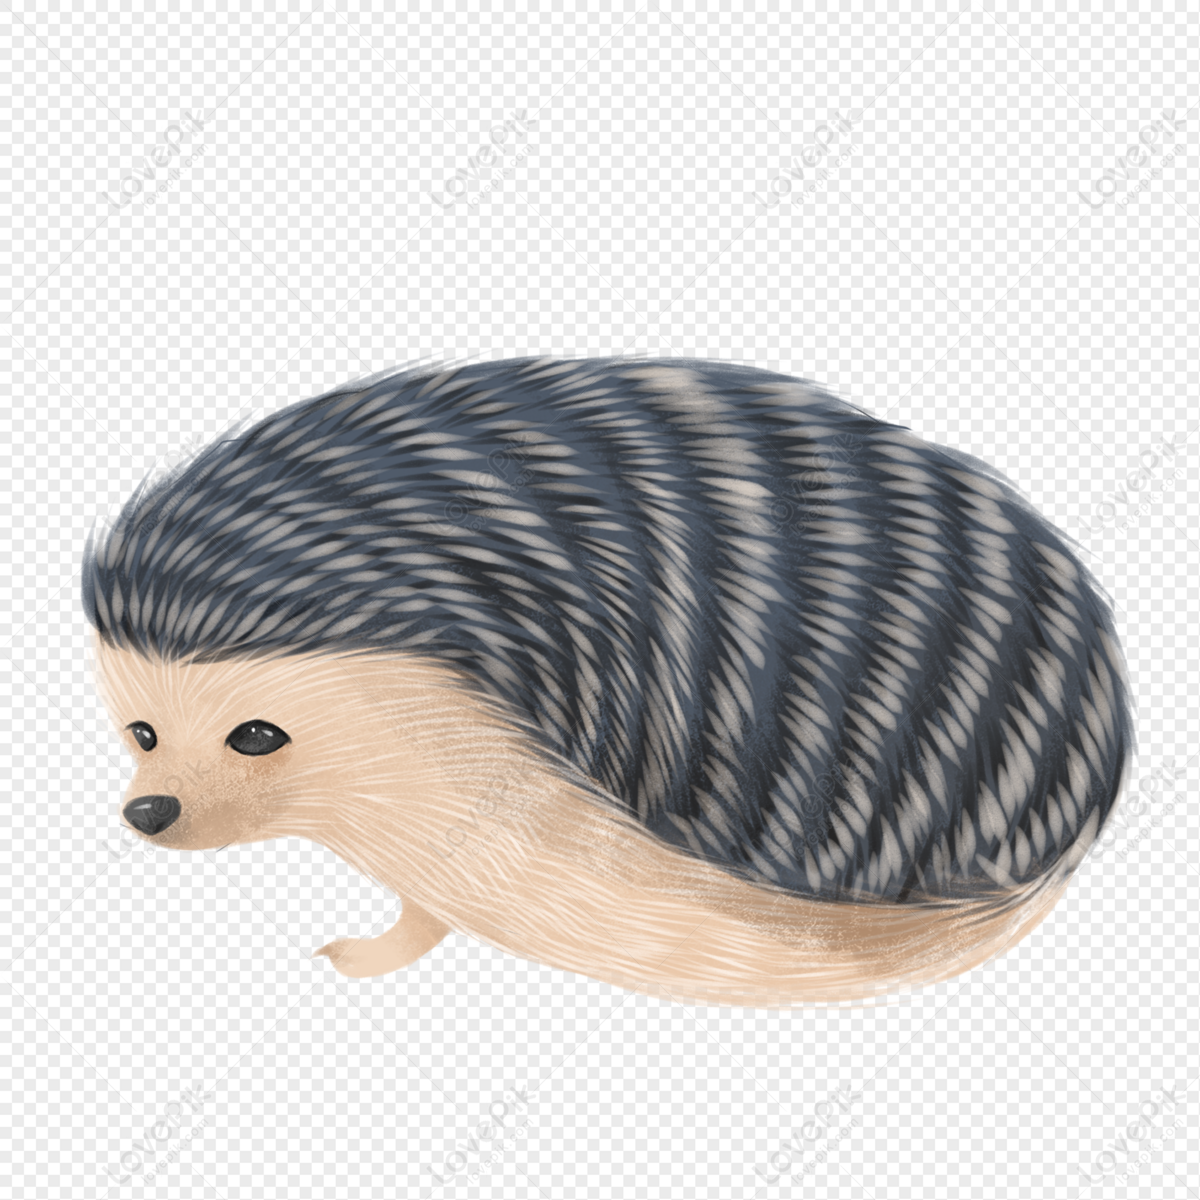 Hedgehog PNG Free Download And Clipart Image For Free Download - Lovepik |  401560843